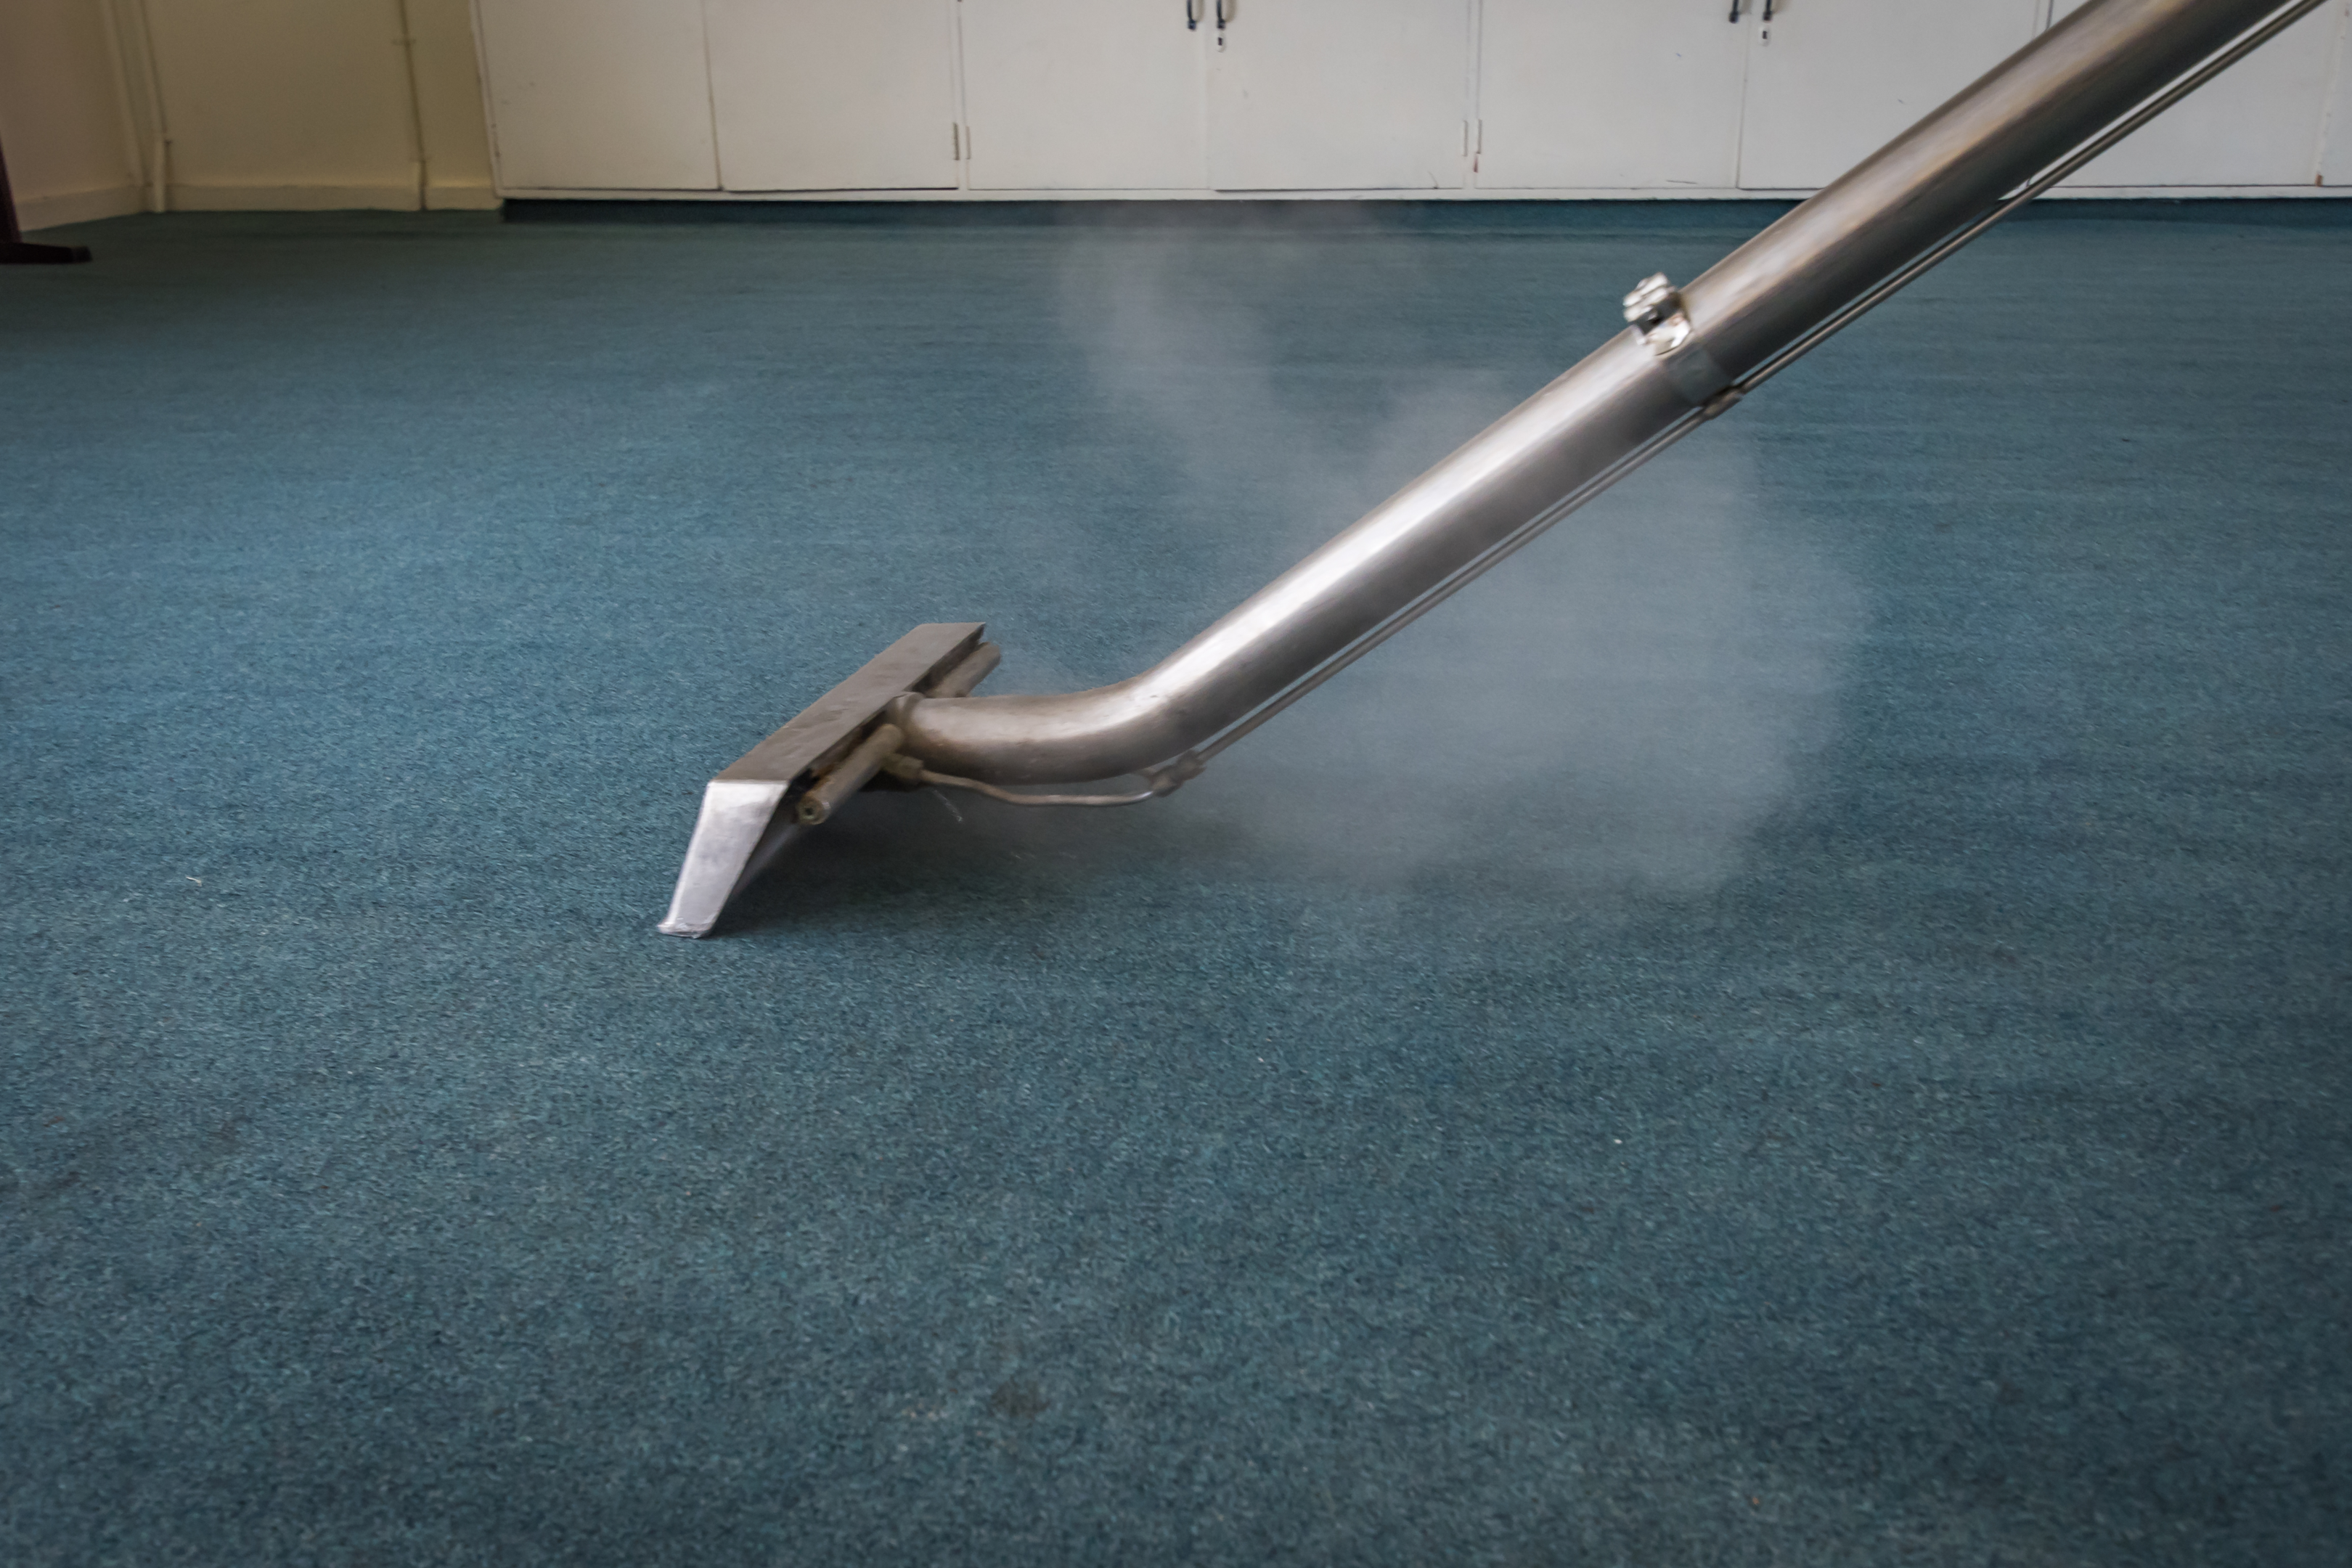 Steam cleaner in use